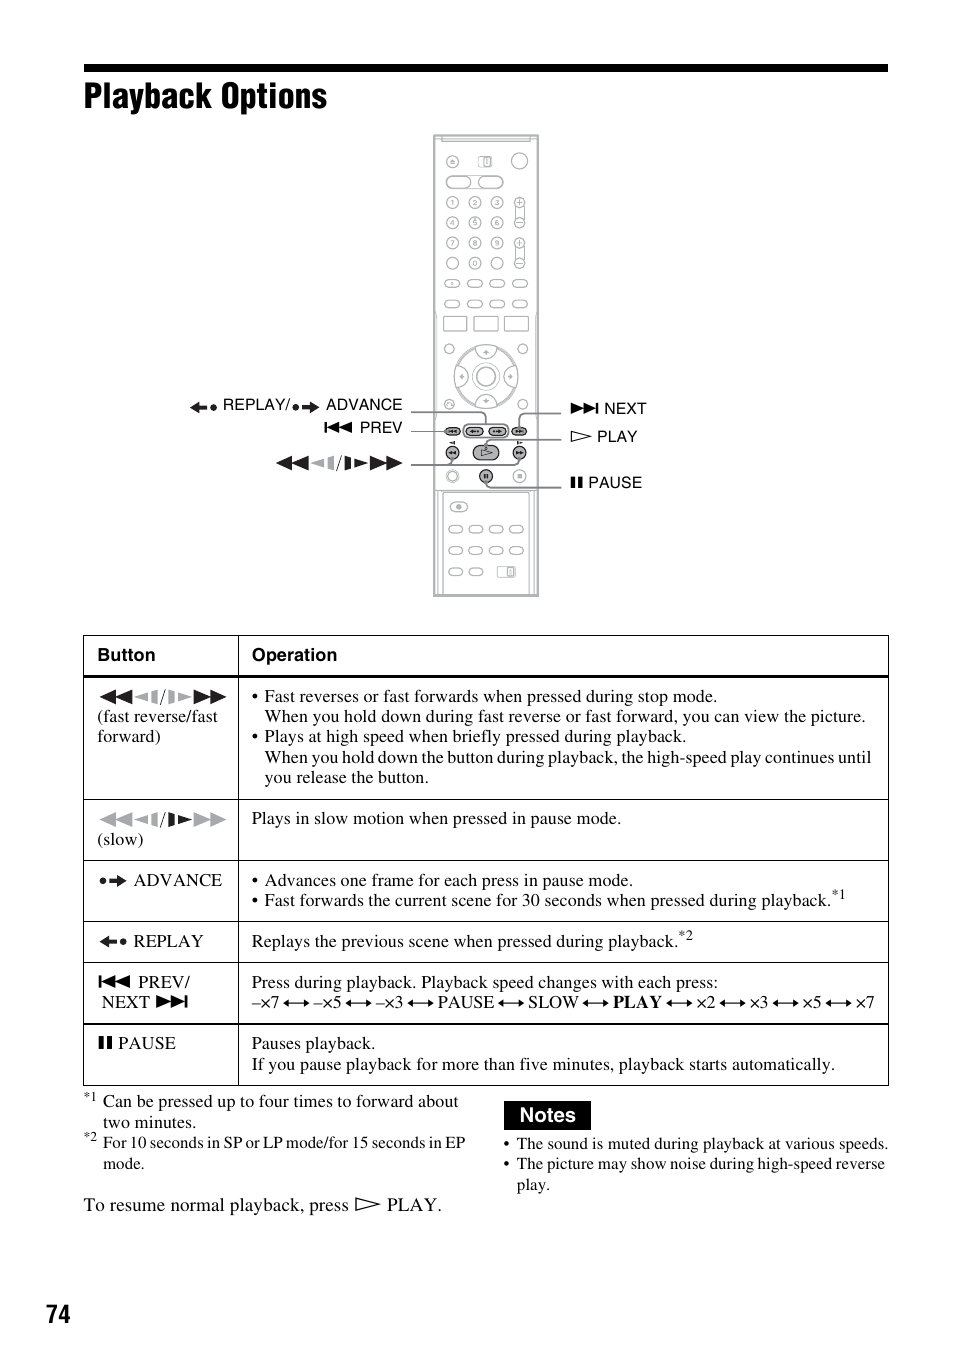 Playback options | Sony RDR-VX521 User Manual | Page 74 / 132